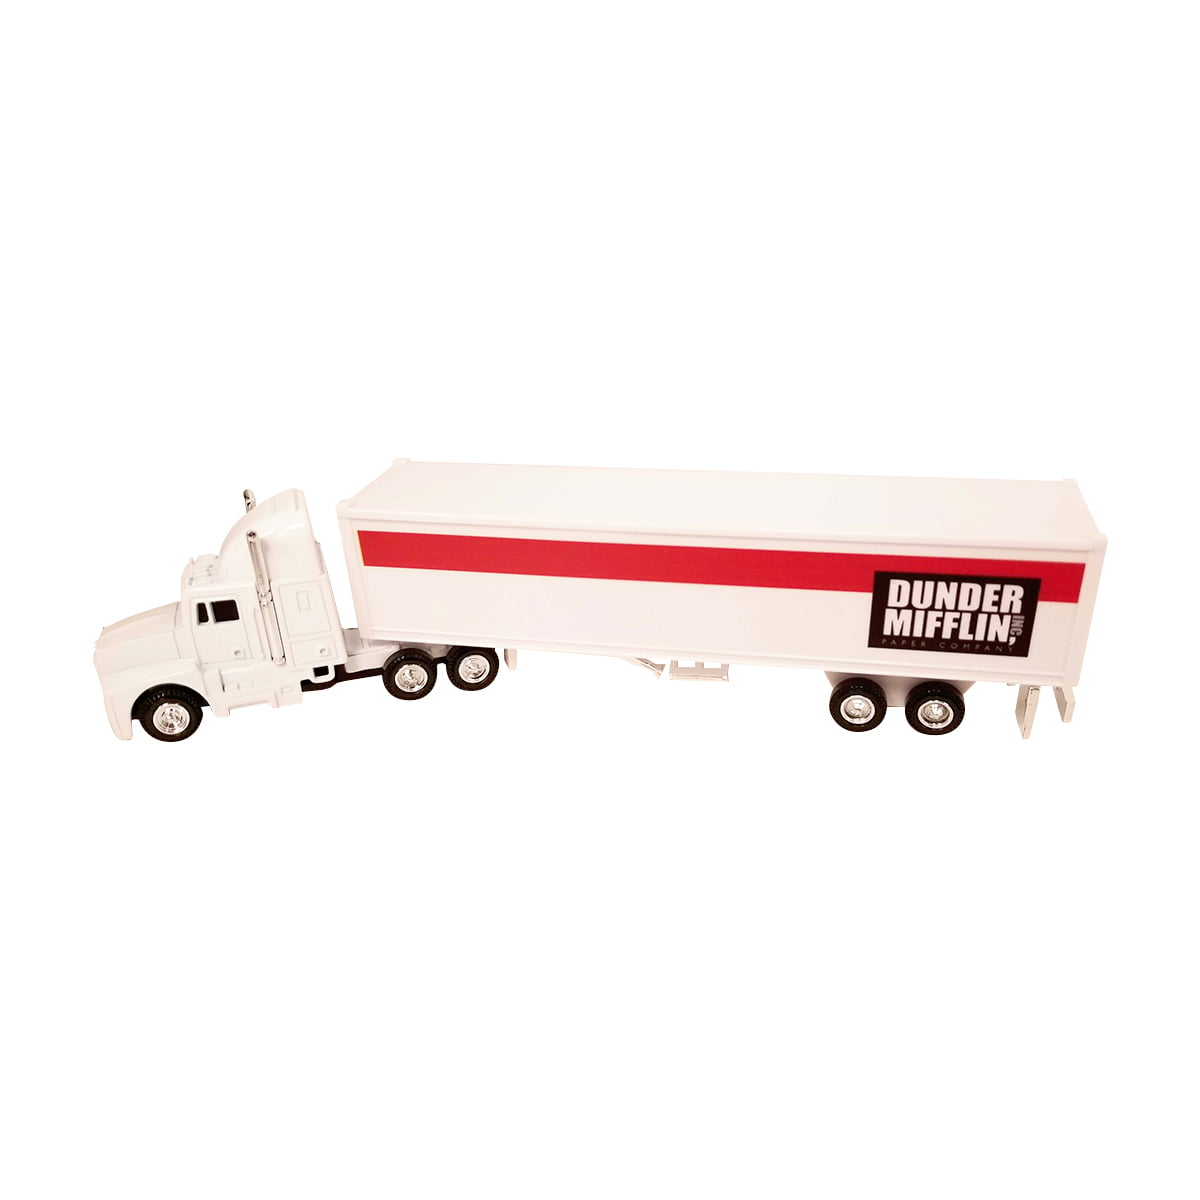 Details about   Dunder Mifflin Replica Tractor Trailer Semi Truck Desk Toy The Office 